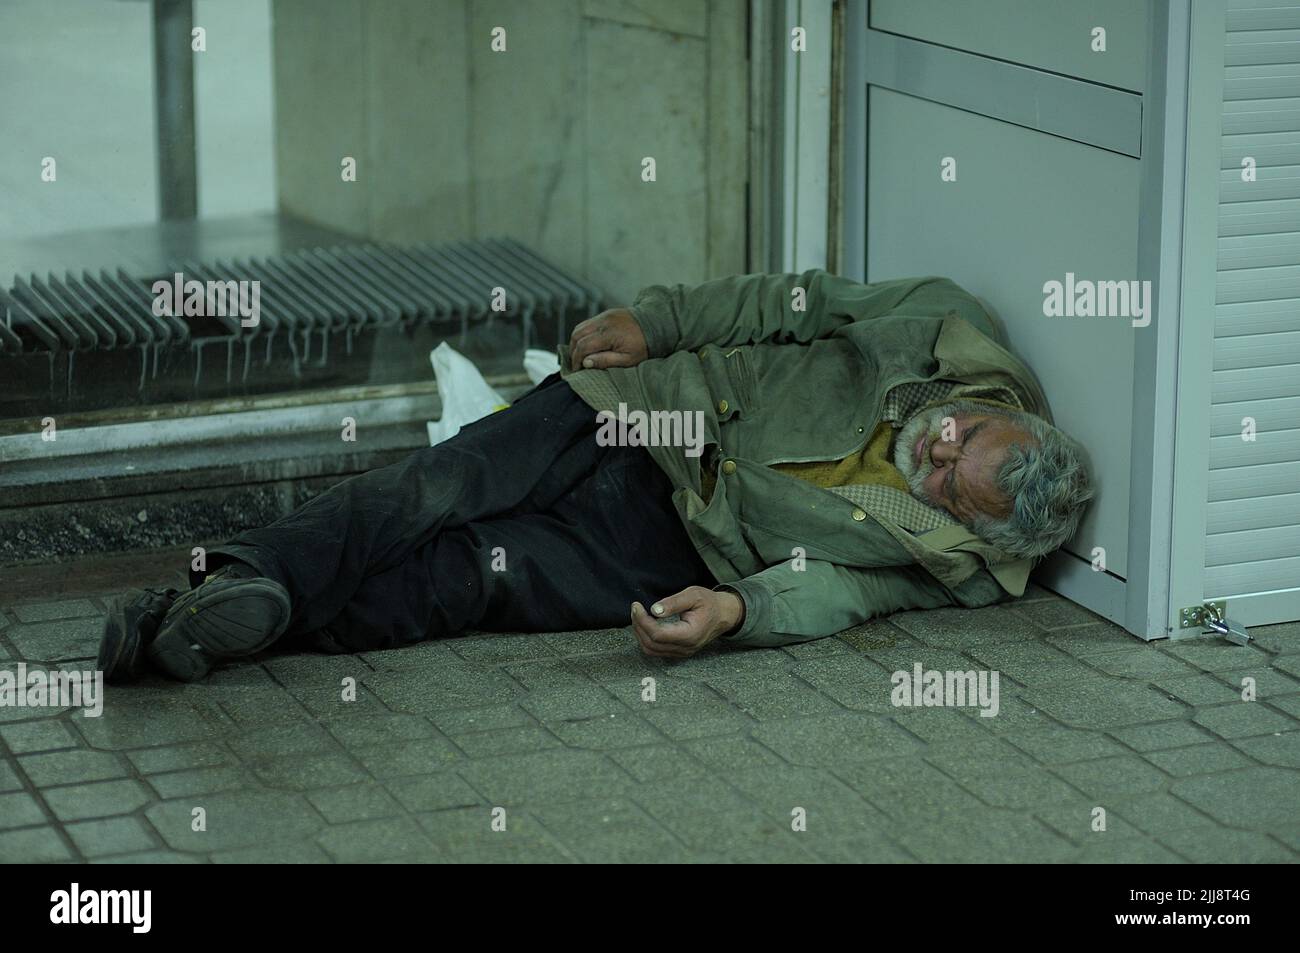 Old homeless man in ragged dirty clothes sleeping on a cold pavement of a subway passage. October 31, 2012. Kyiv, Ukraine Stock Photo